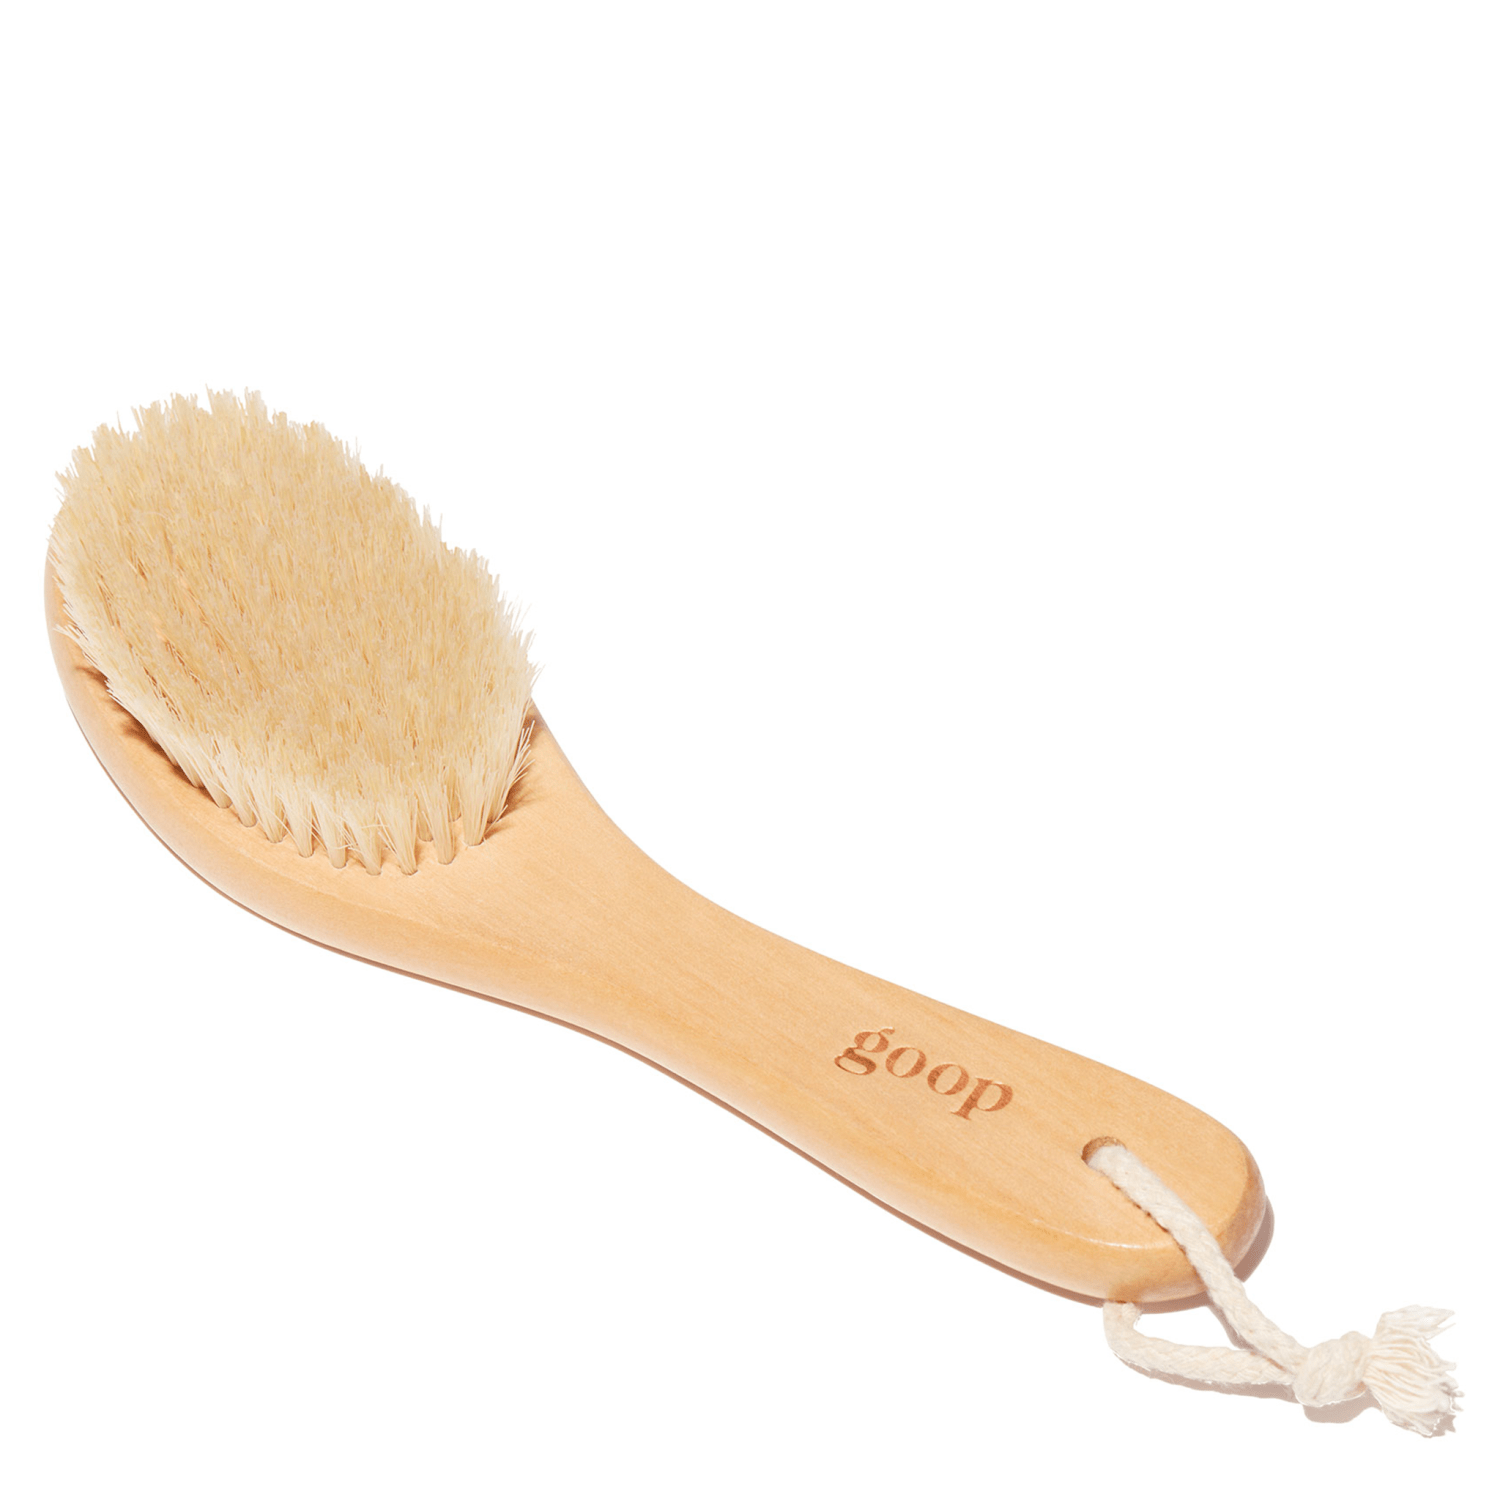 This dry brush set is popular on  right now